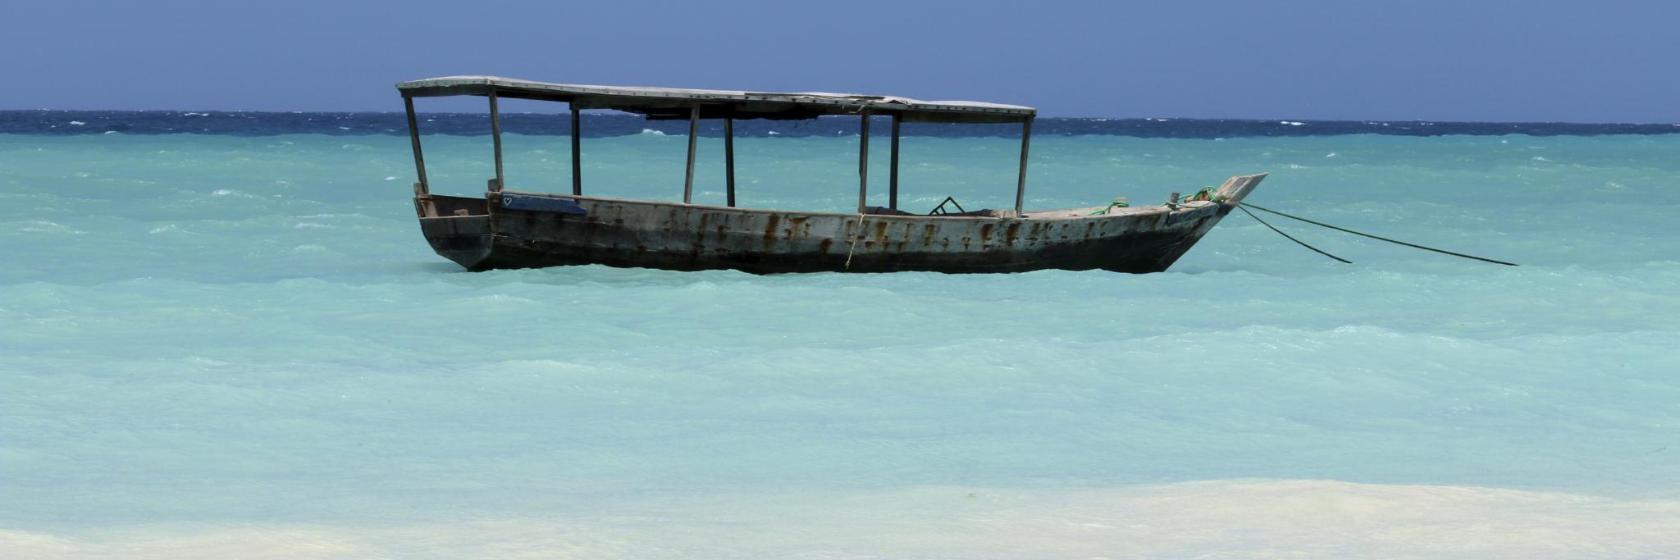 Recommended Hotels in Pemba Island, Tanzania